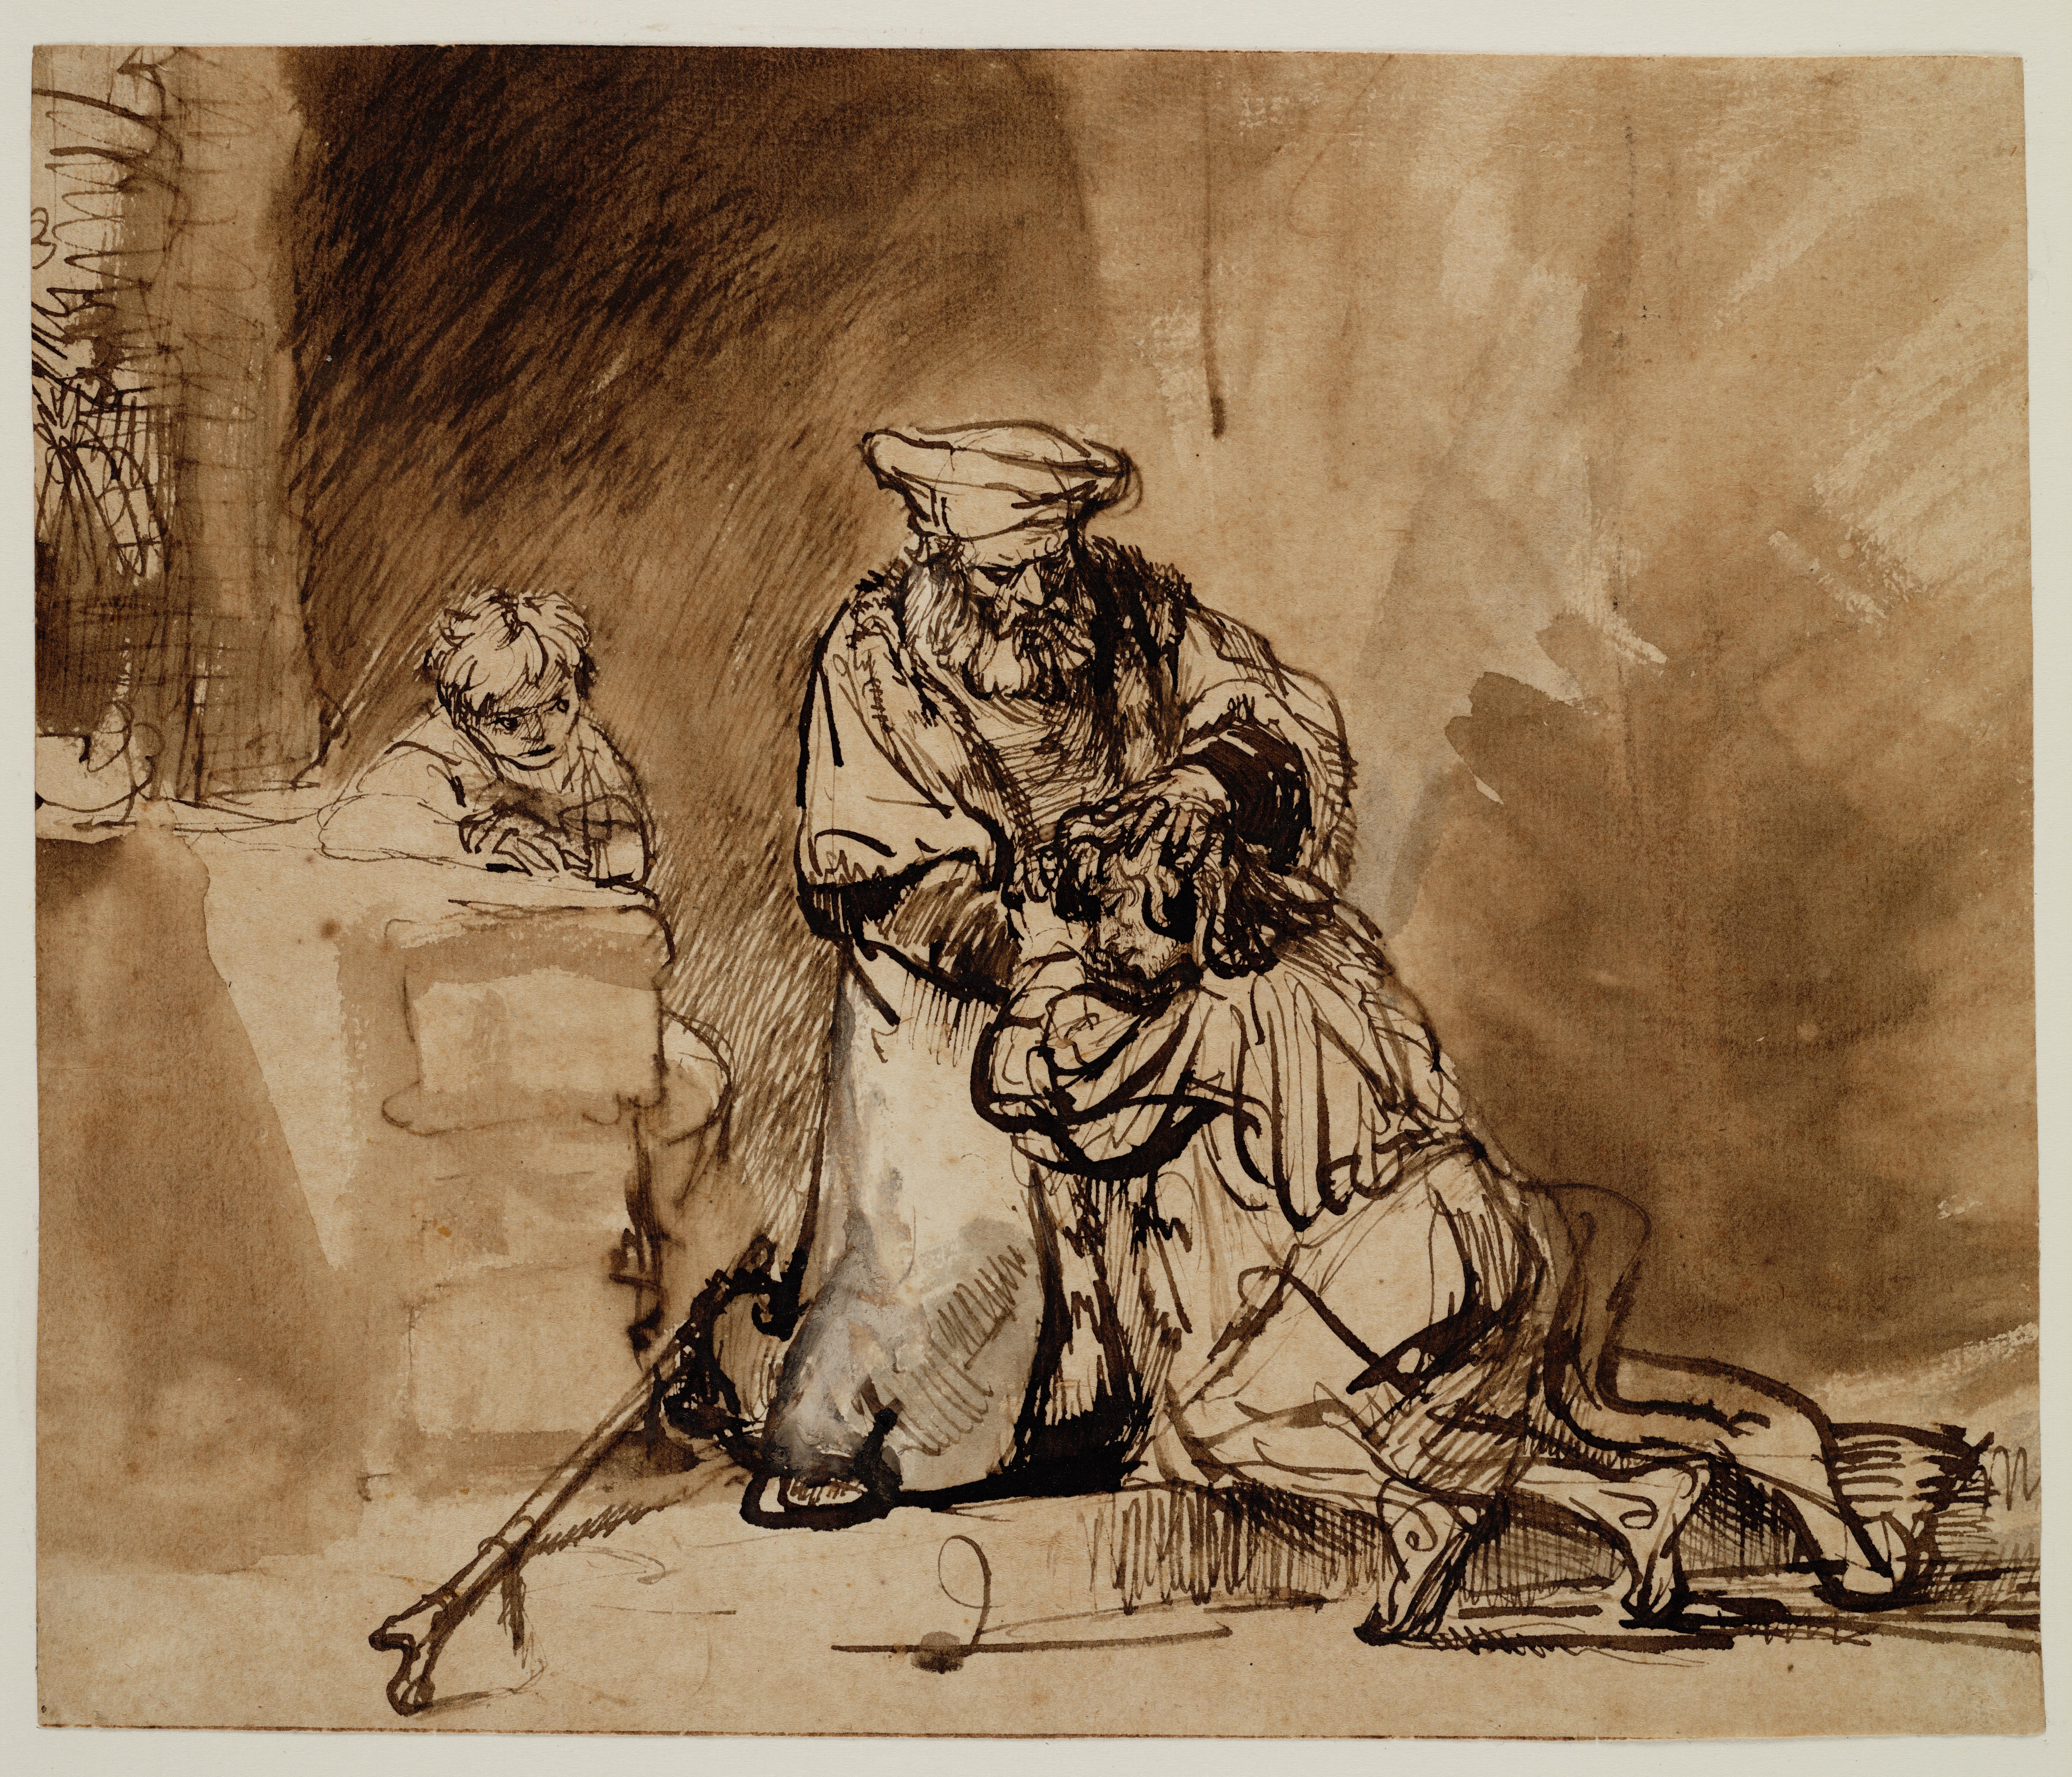 FileProdigal son by Rembrandt (drawing, 1642).jpg Wikipedia